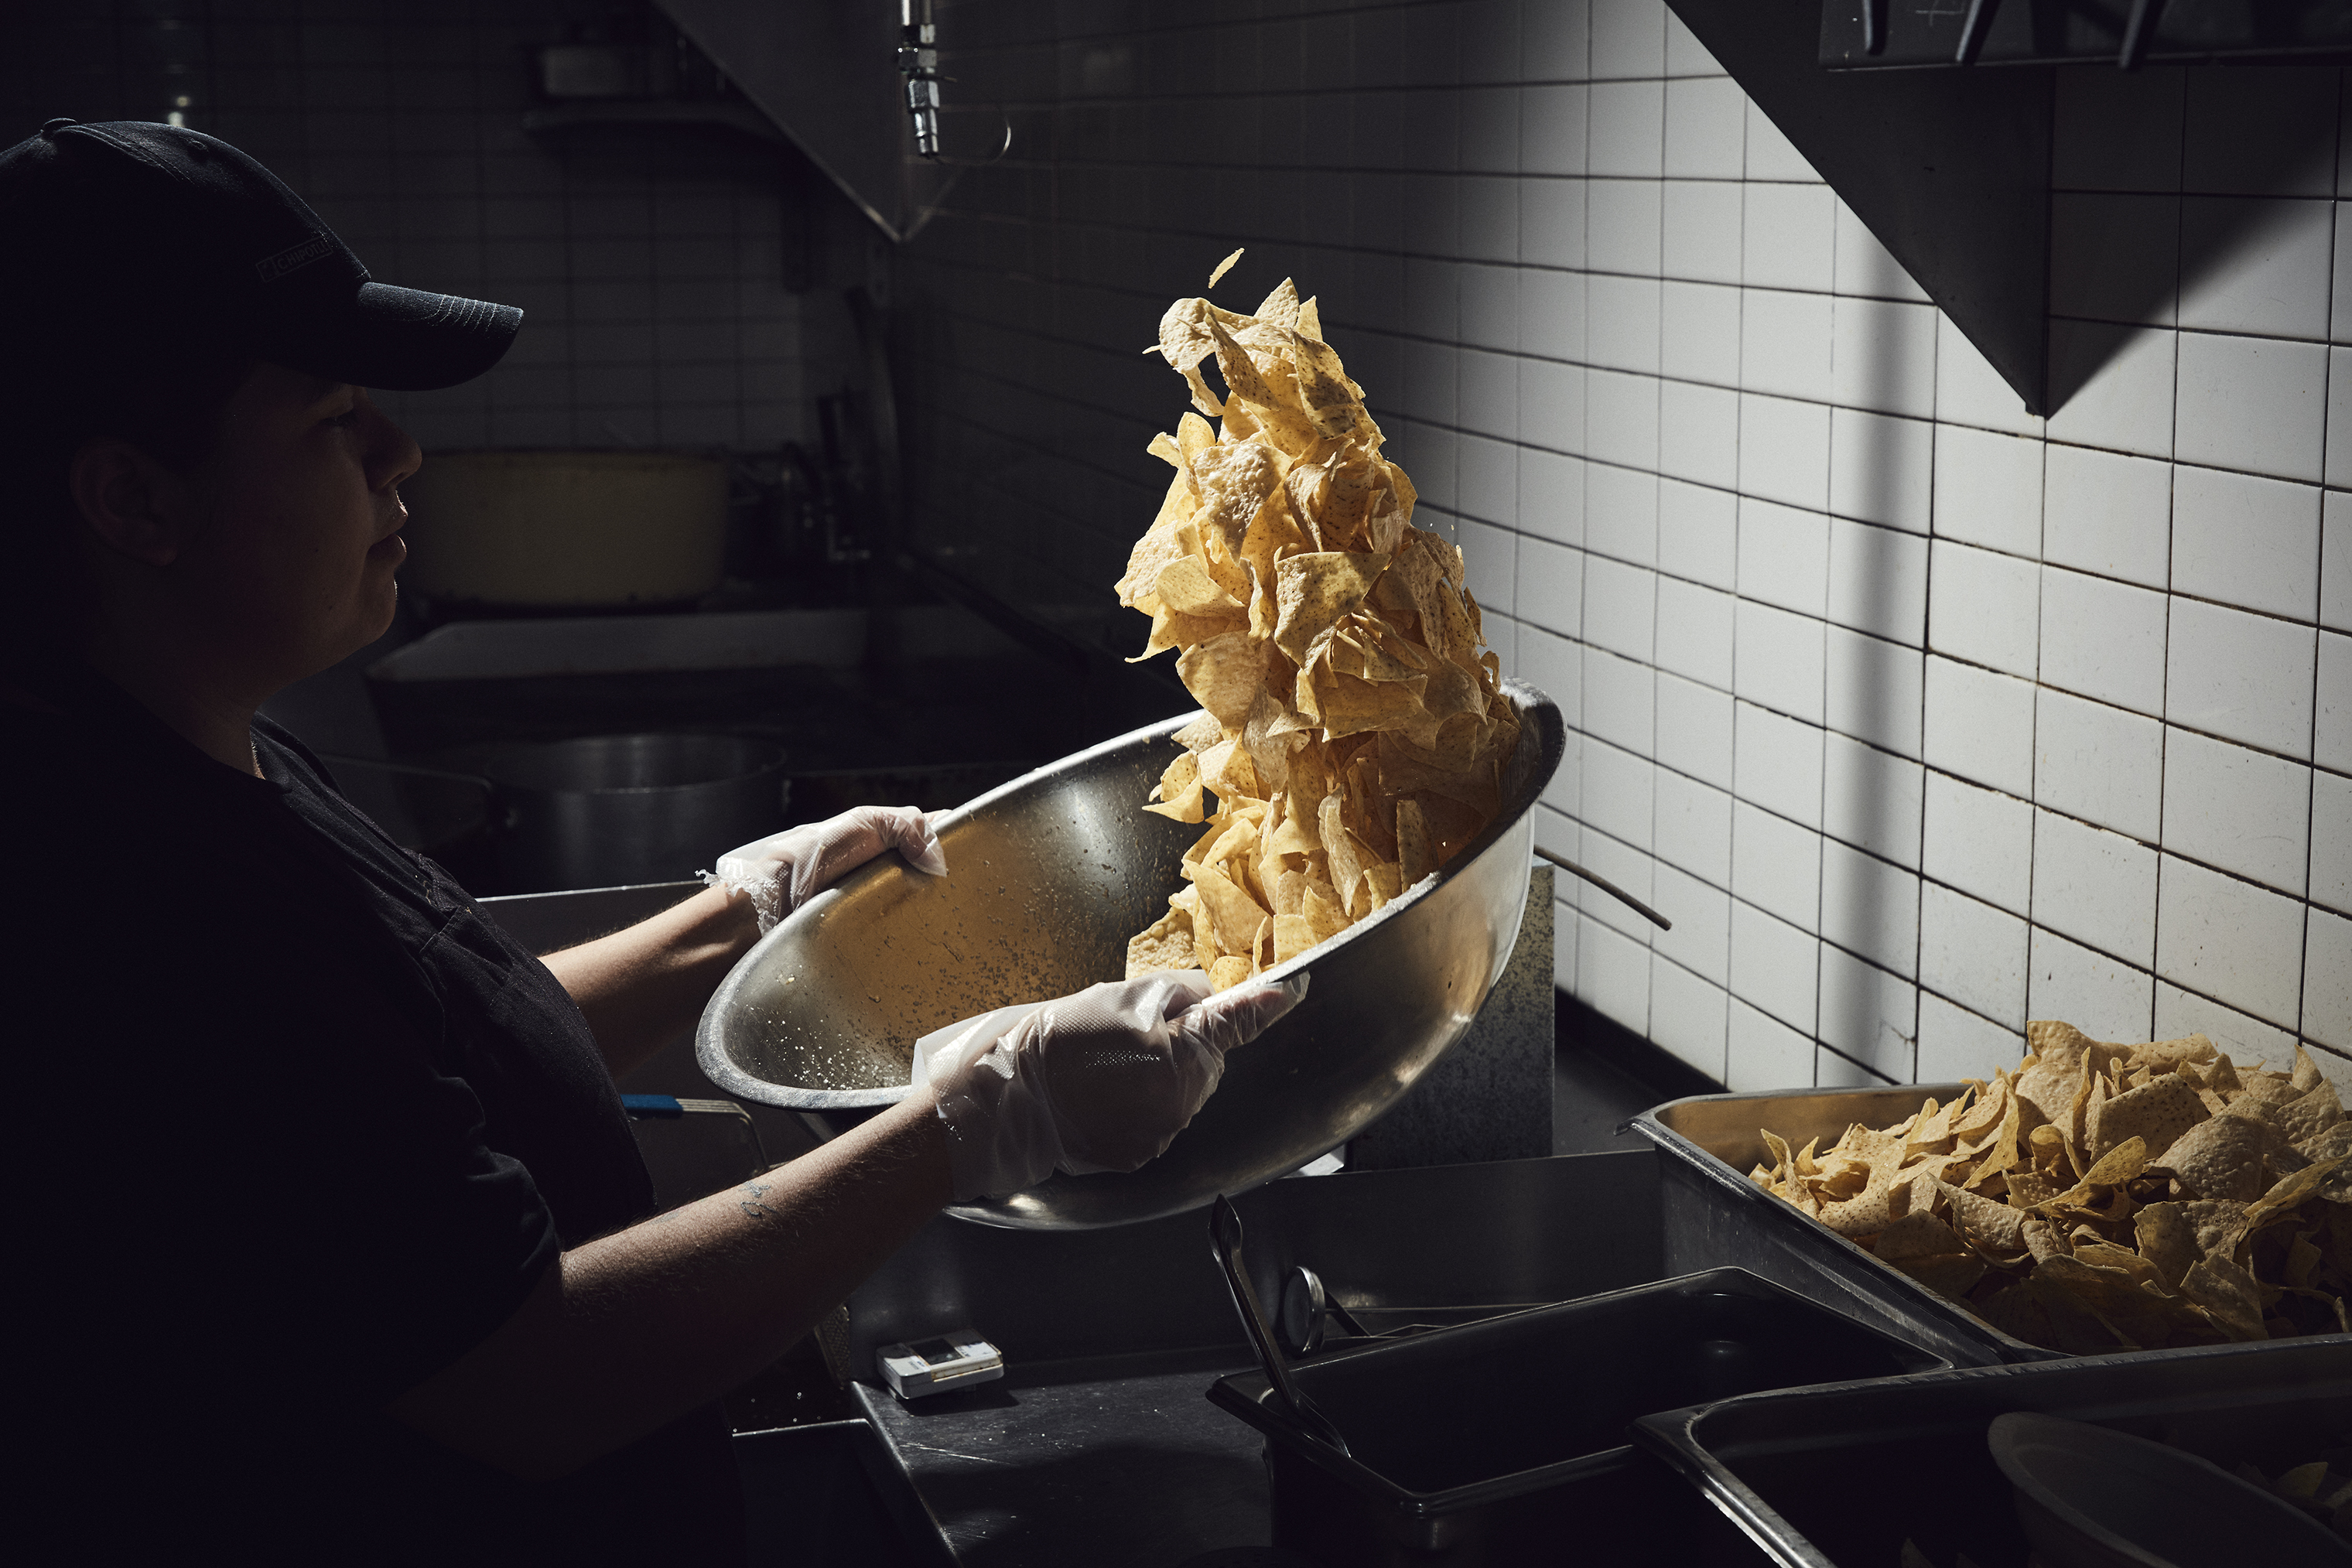 A Chipotle employee seasons chips at a location in Newport Beach, Calif. The company, founded in 1993, now has roughly 70,000 employees and 2,450 locations. (Shaughn and John for TIME)